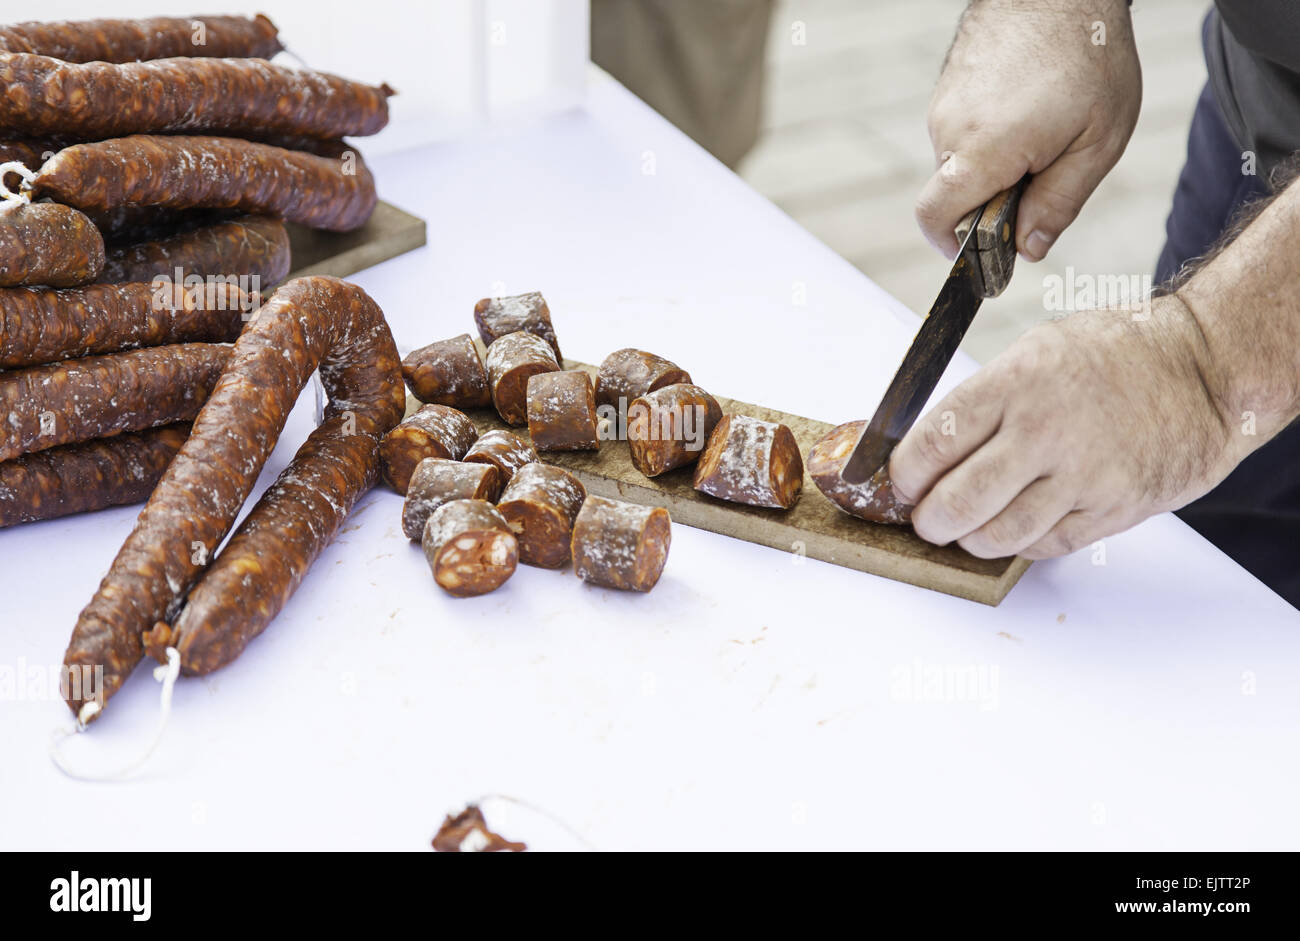 Cutting sausage with a knife, detail of a chef cutting food Stock Photo